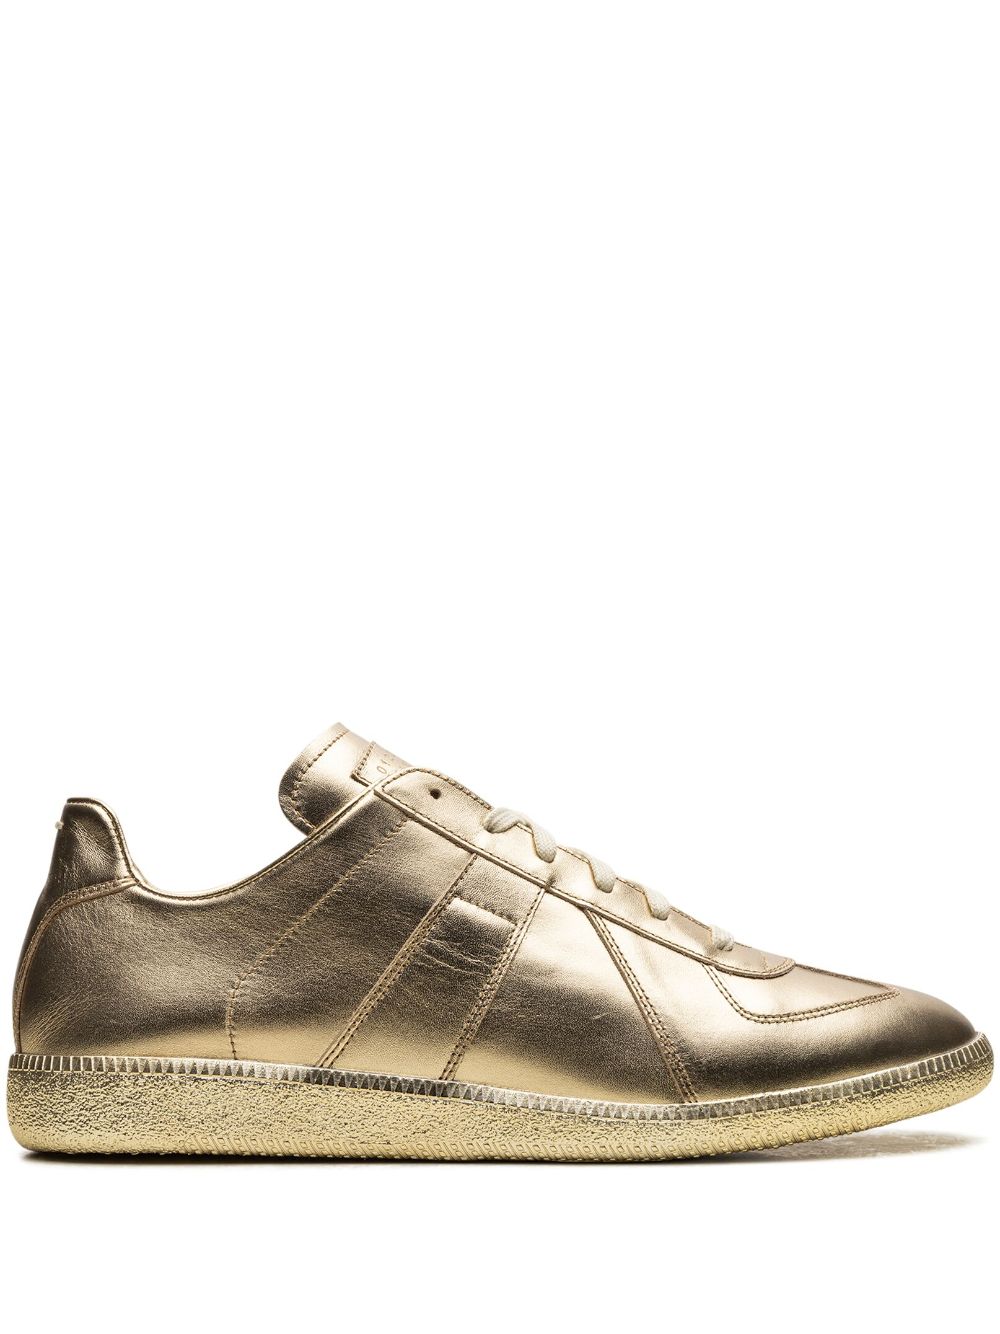 Maison Margiela Replica "gold Plated" Low-top Trainers